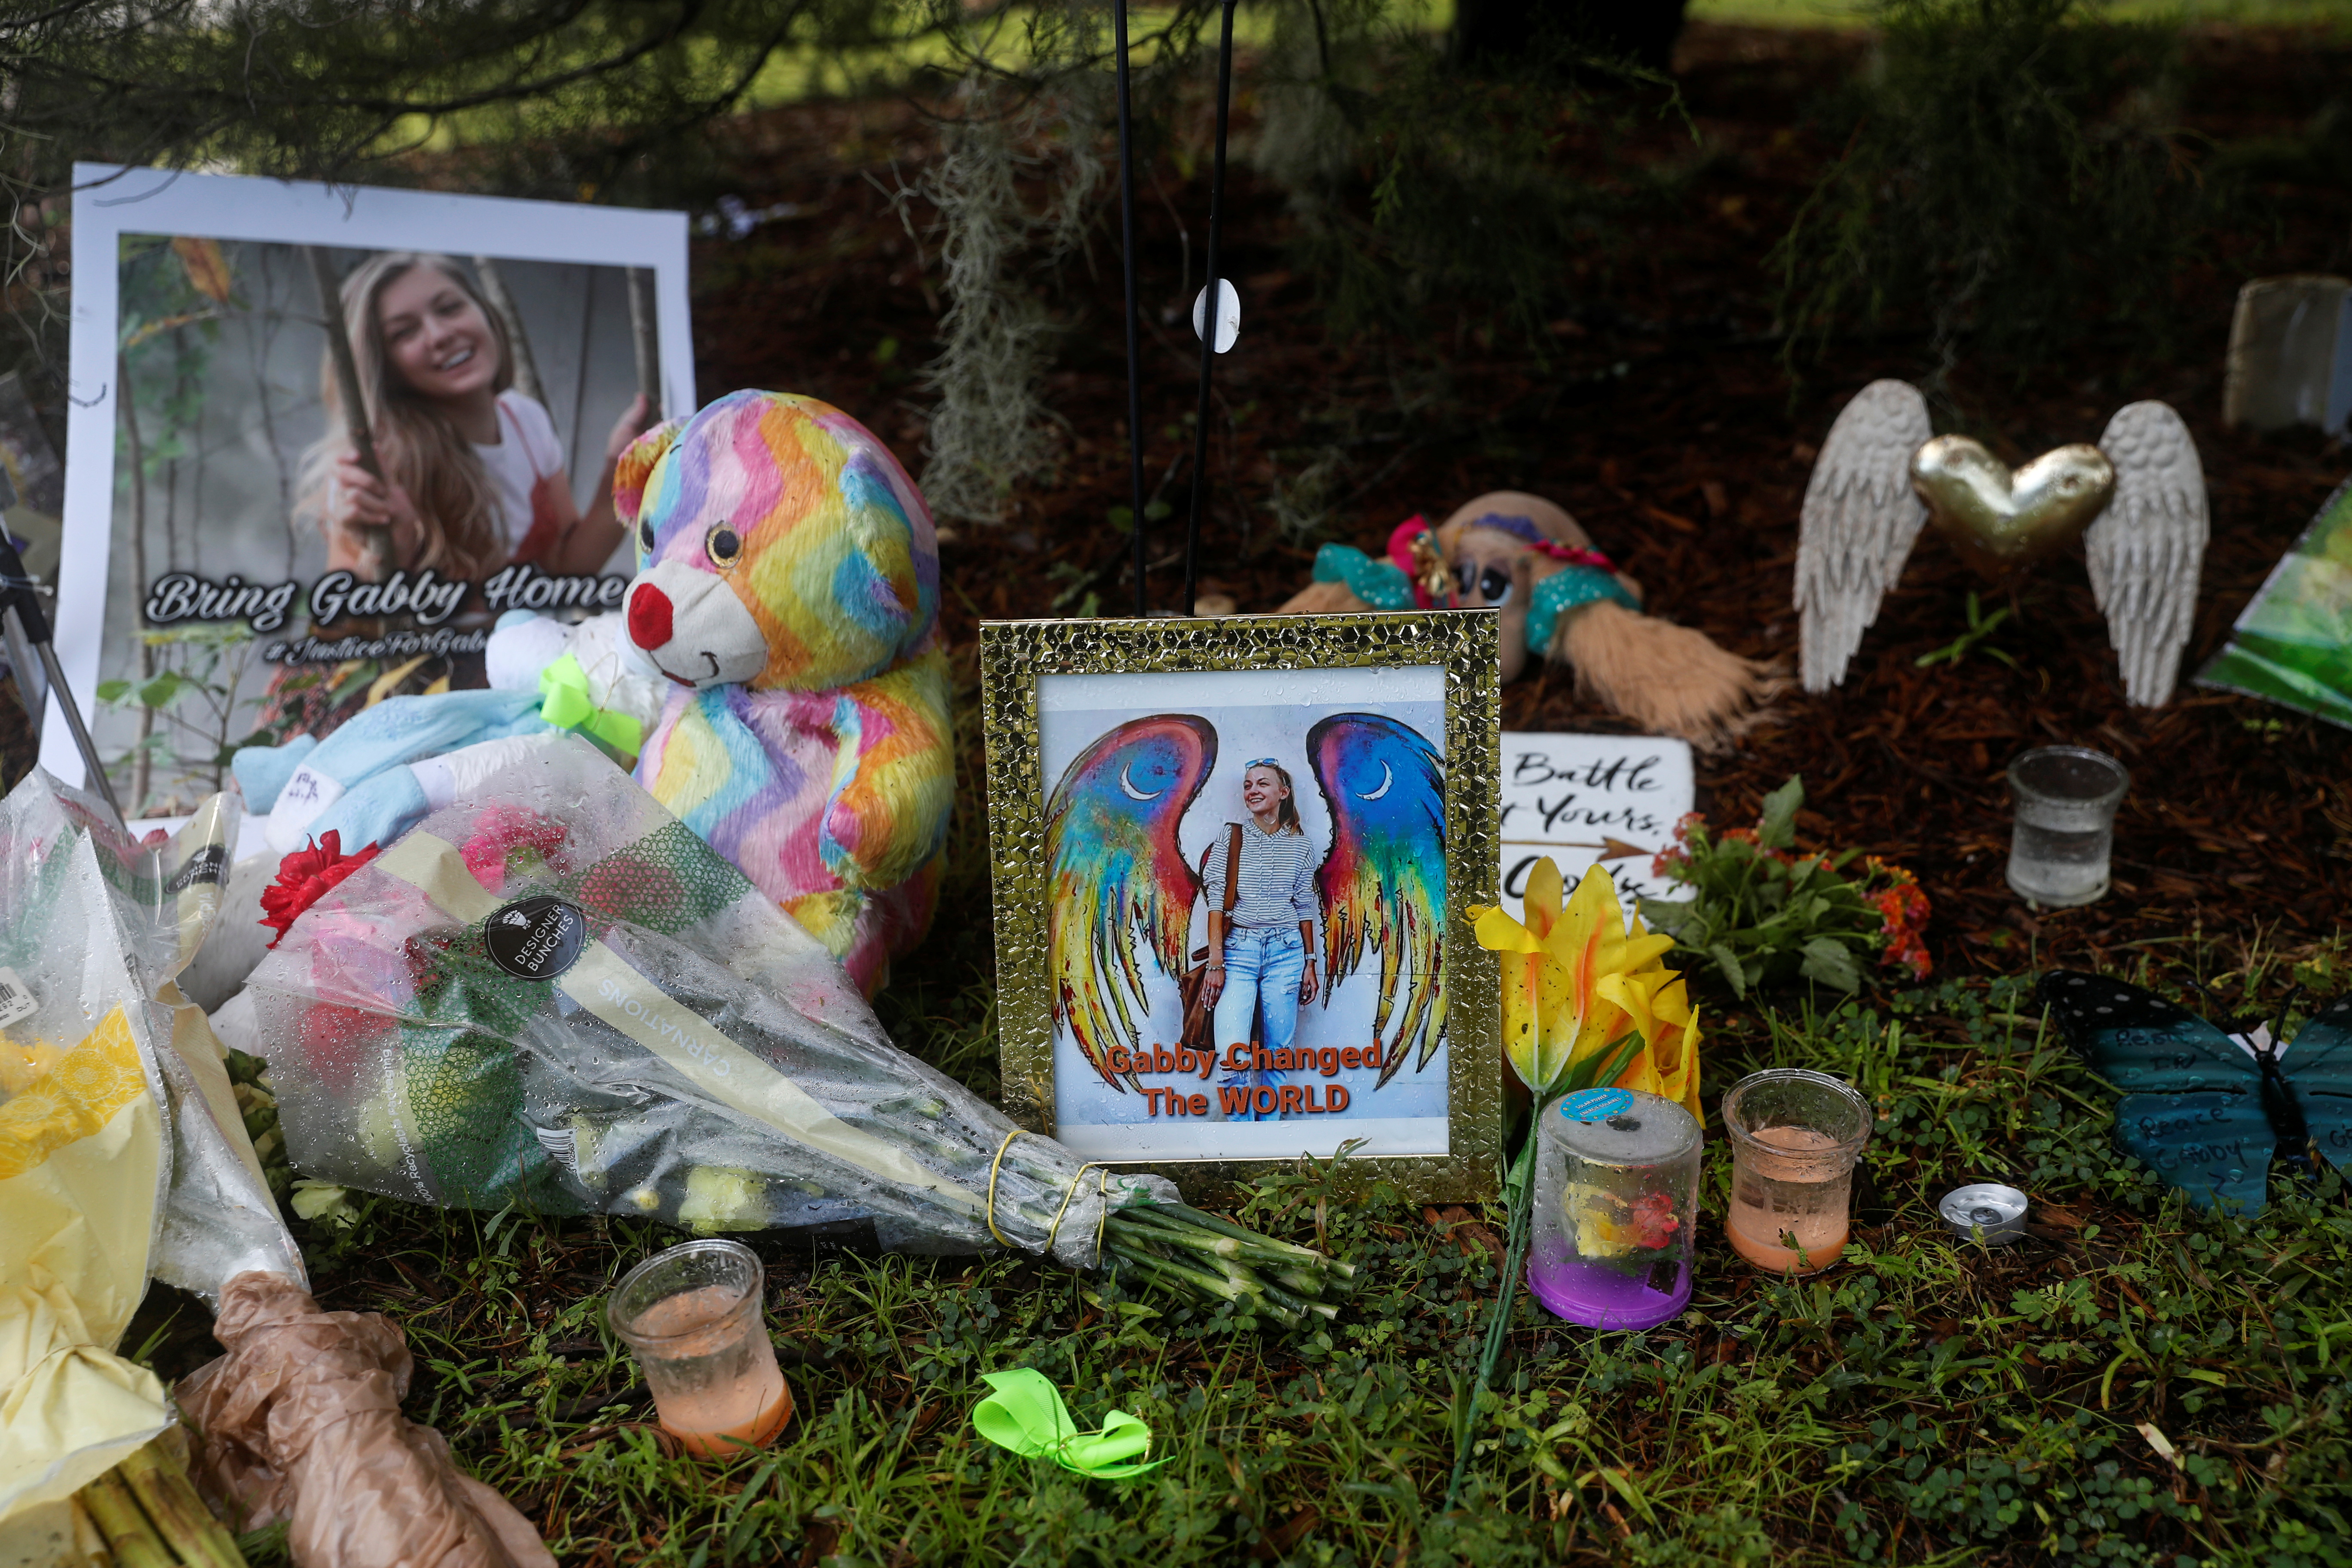 A makeshift memorial for Gabby Petito is seen, after a woman's body found in a Wyoming national park was identified as that of the missing 22-year-old travel blogger, near North Port City Hall in North Port, Florida, U.S., September 22, 2021. REUTERS/Shannon Stapleton